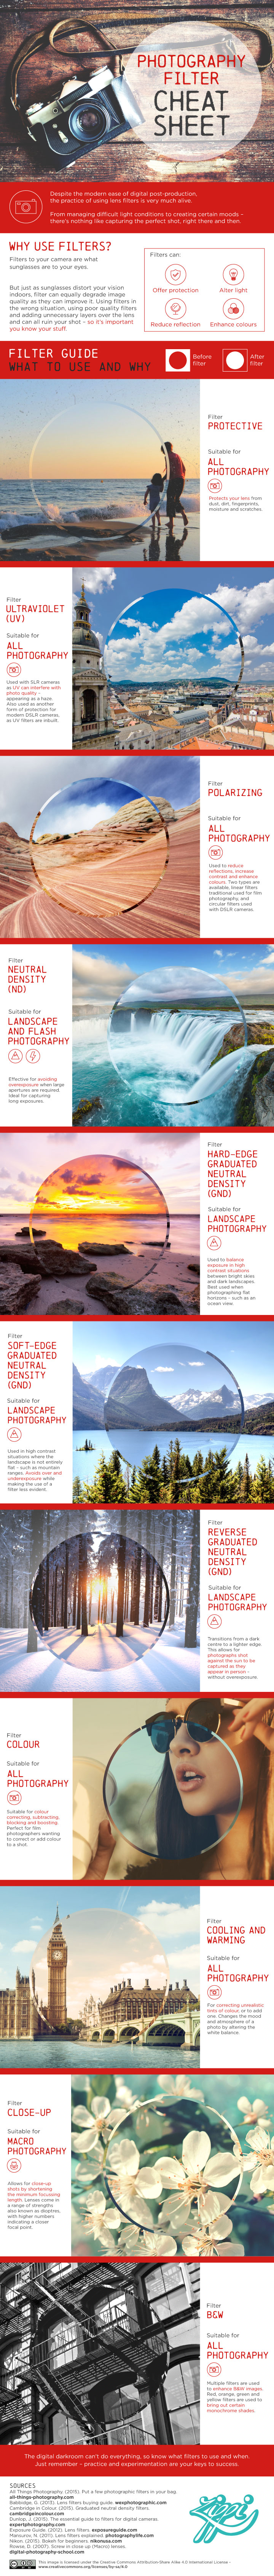 photography filters cheat sheet